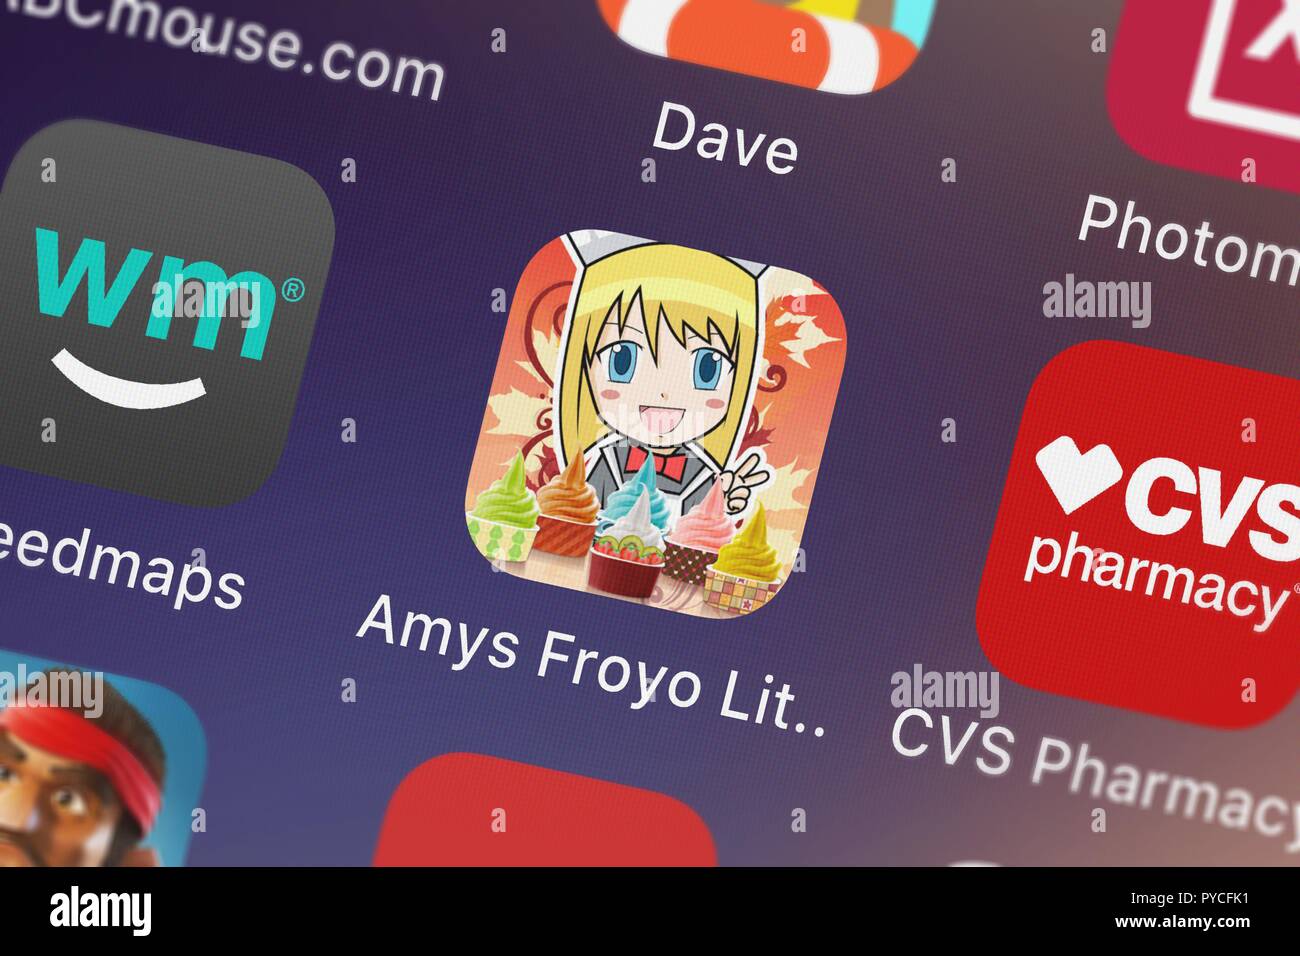 London, United Kingdom - October 26, 2018: Screenshot of the Amy's Froyo Lite - Make Froyo mobile app from Games for Friends LLC icon on an iPhone. Stock Photo